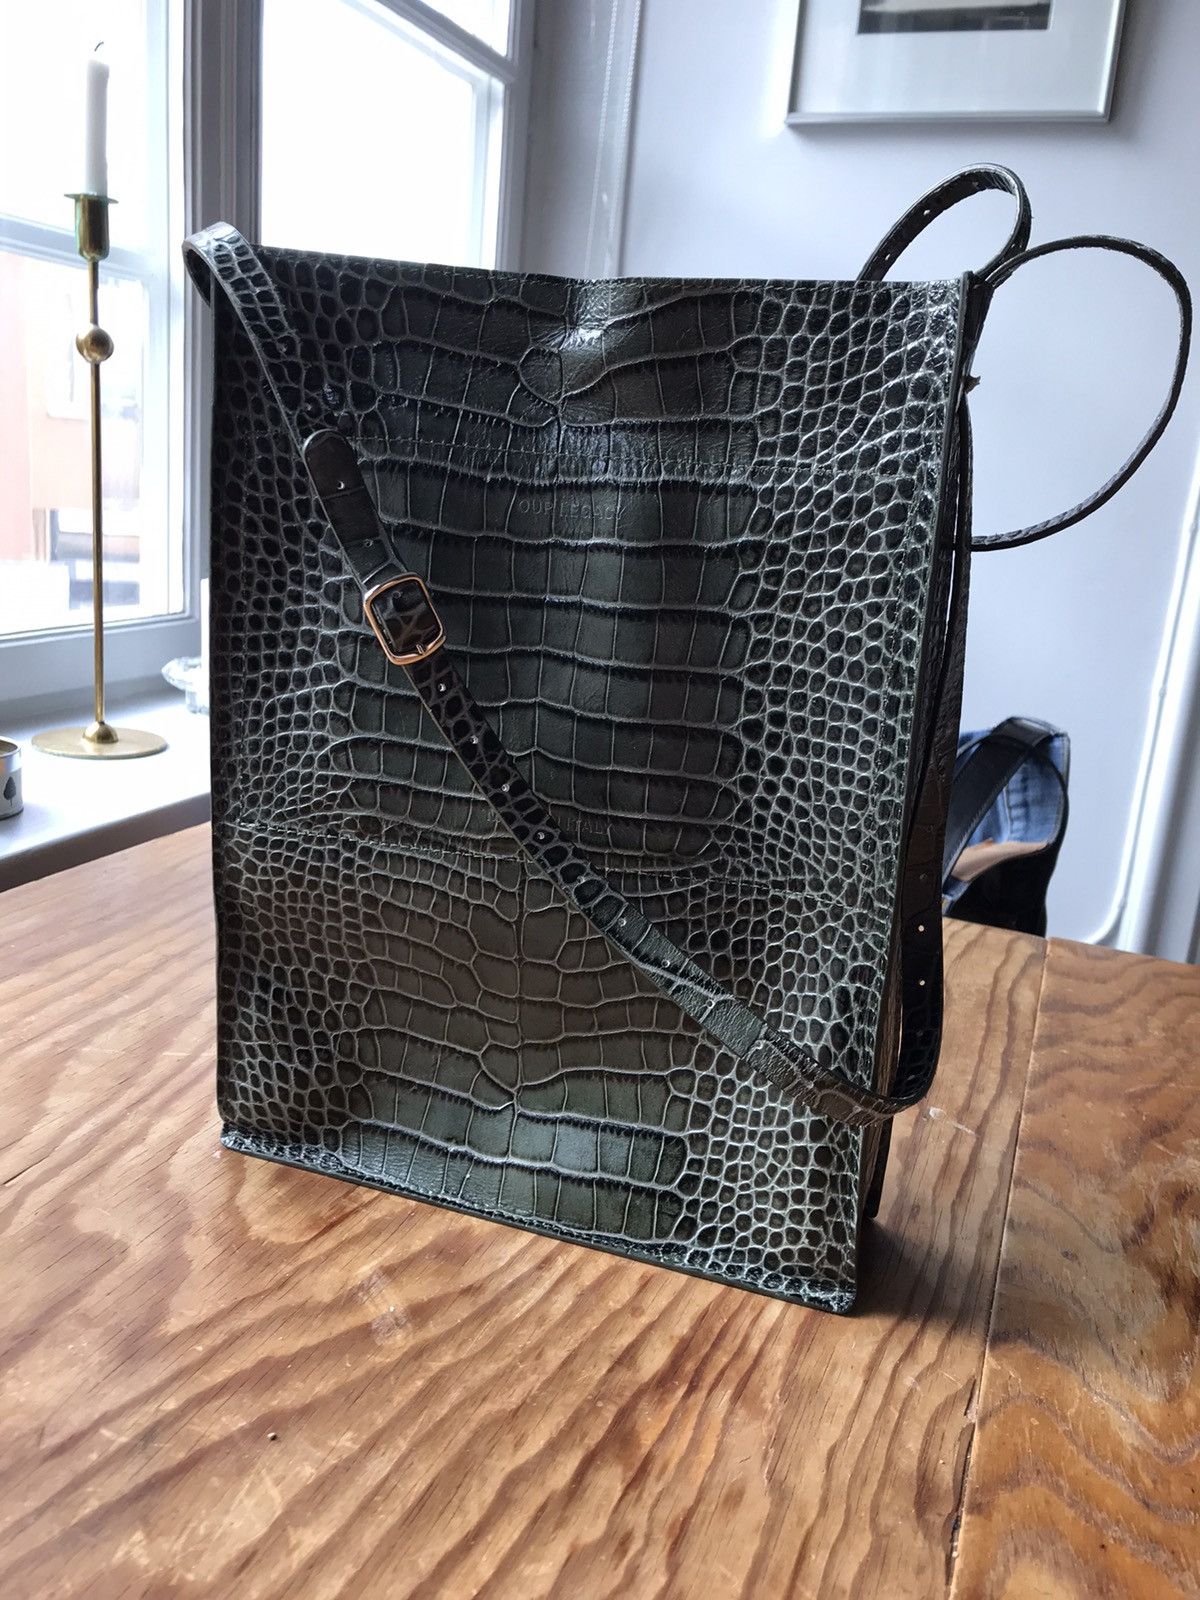 Our Legacy SUB TOTE OLIVE CROCO DEBOSSED | Grailed